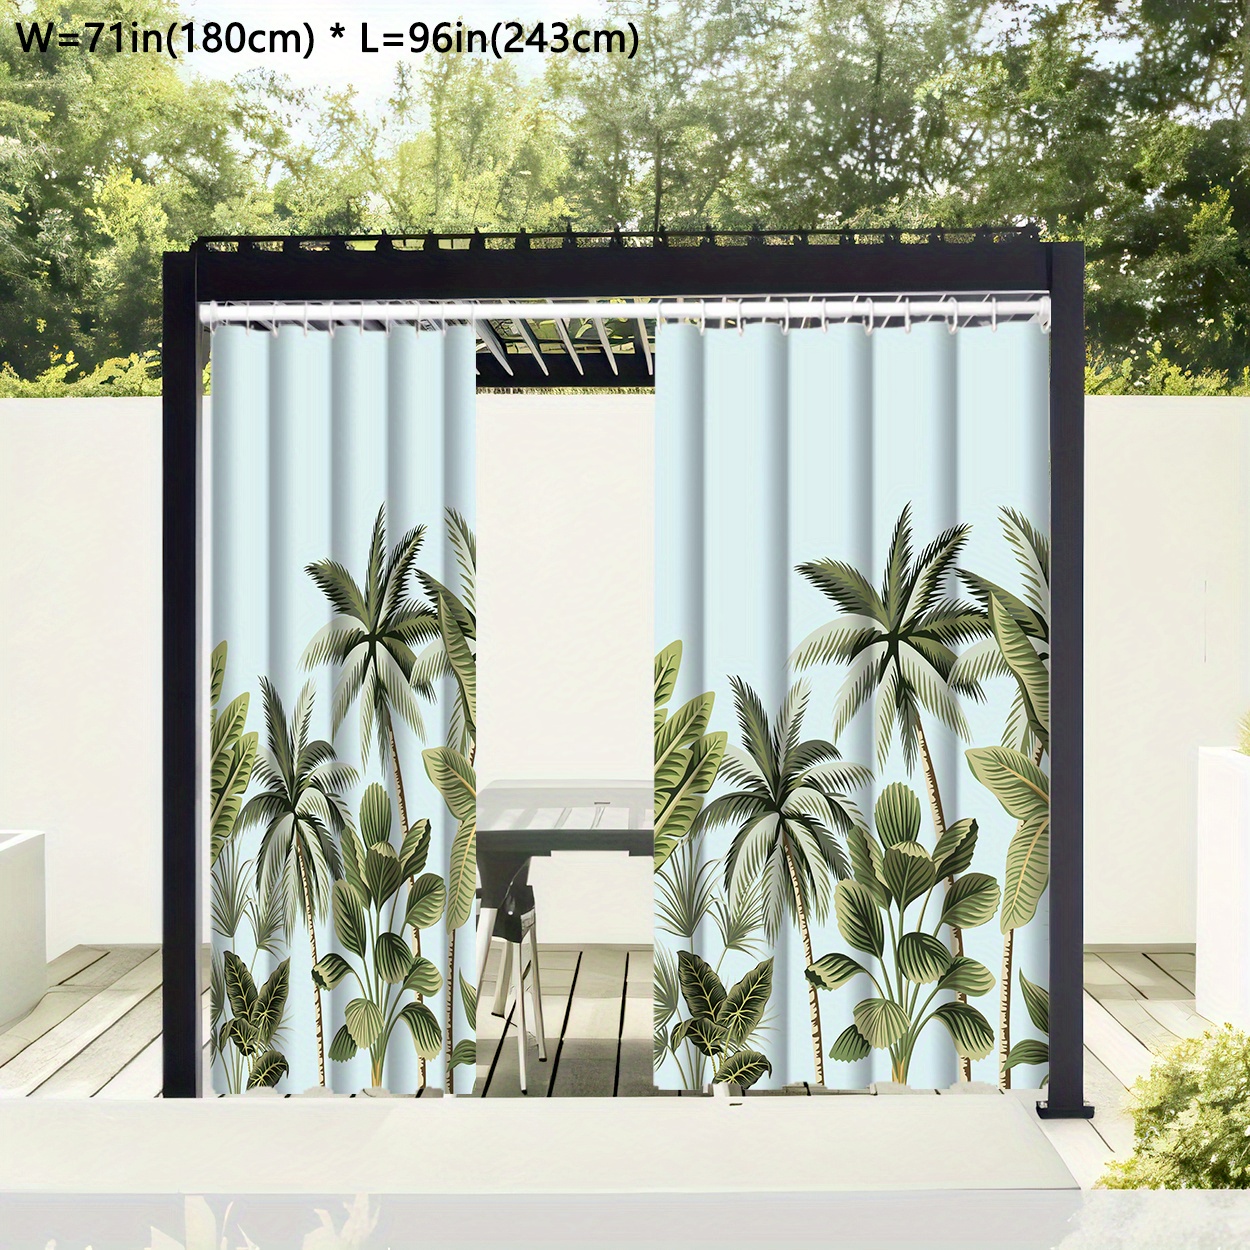 

1pc Outdoor Yard Curtains, Waterproof Outdoor Garden Curtains, Modern Minimalist Style Nature Themed Tropical Plant Pattern Curtains, Suitable For Outside Booths, Hallways, Patio